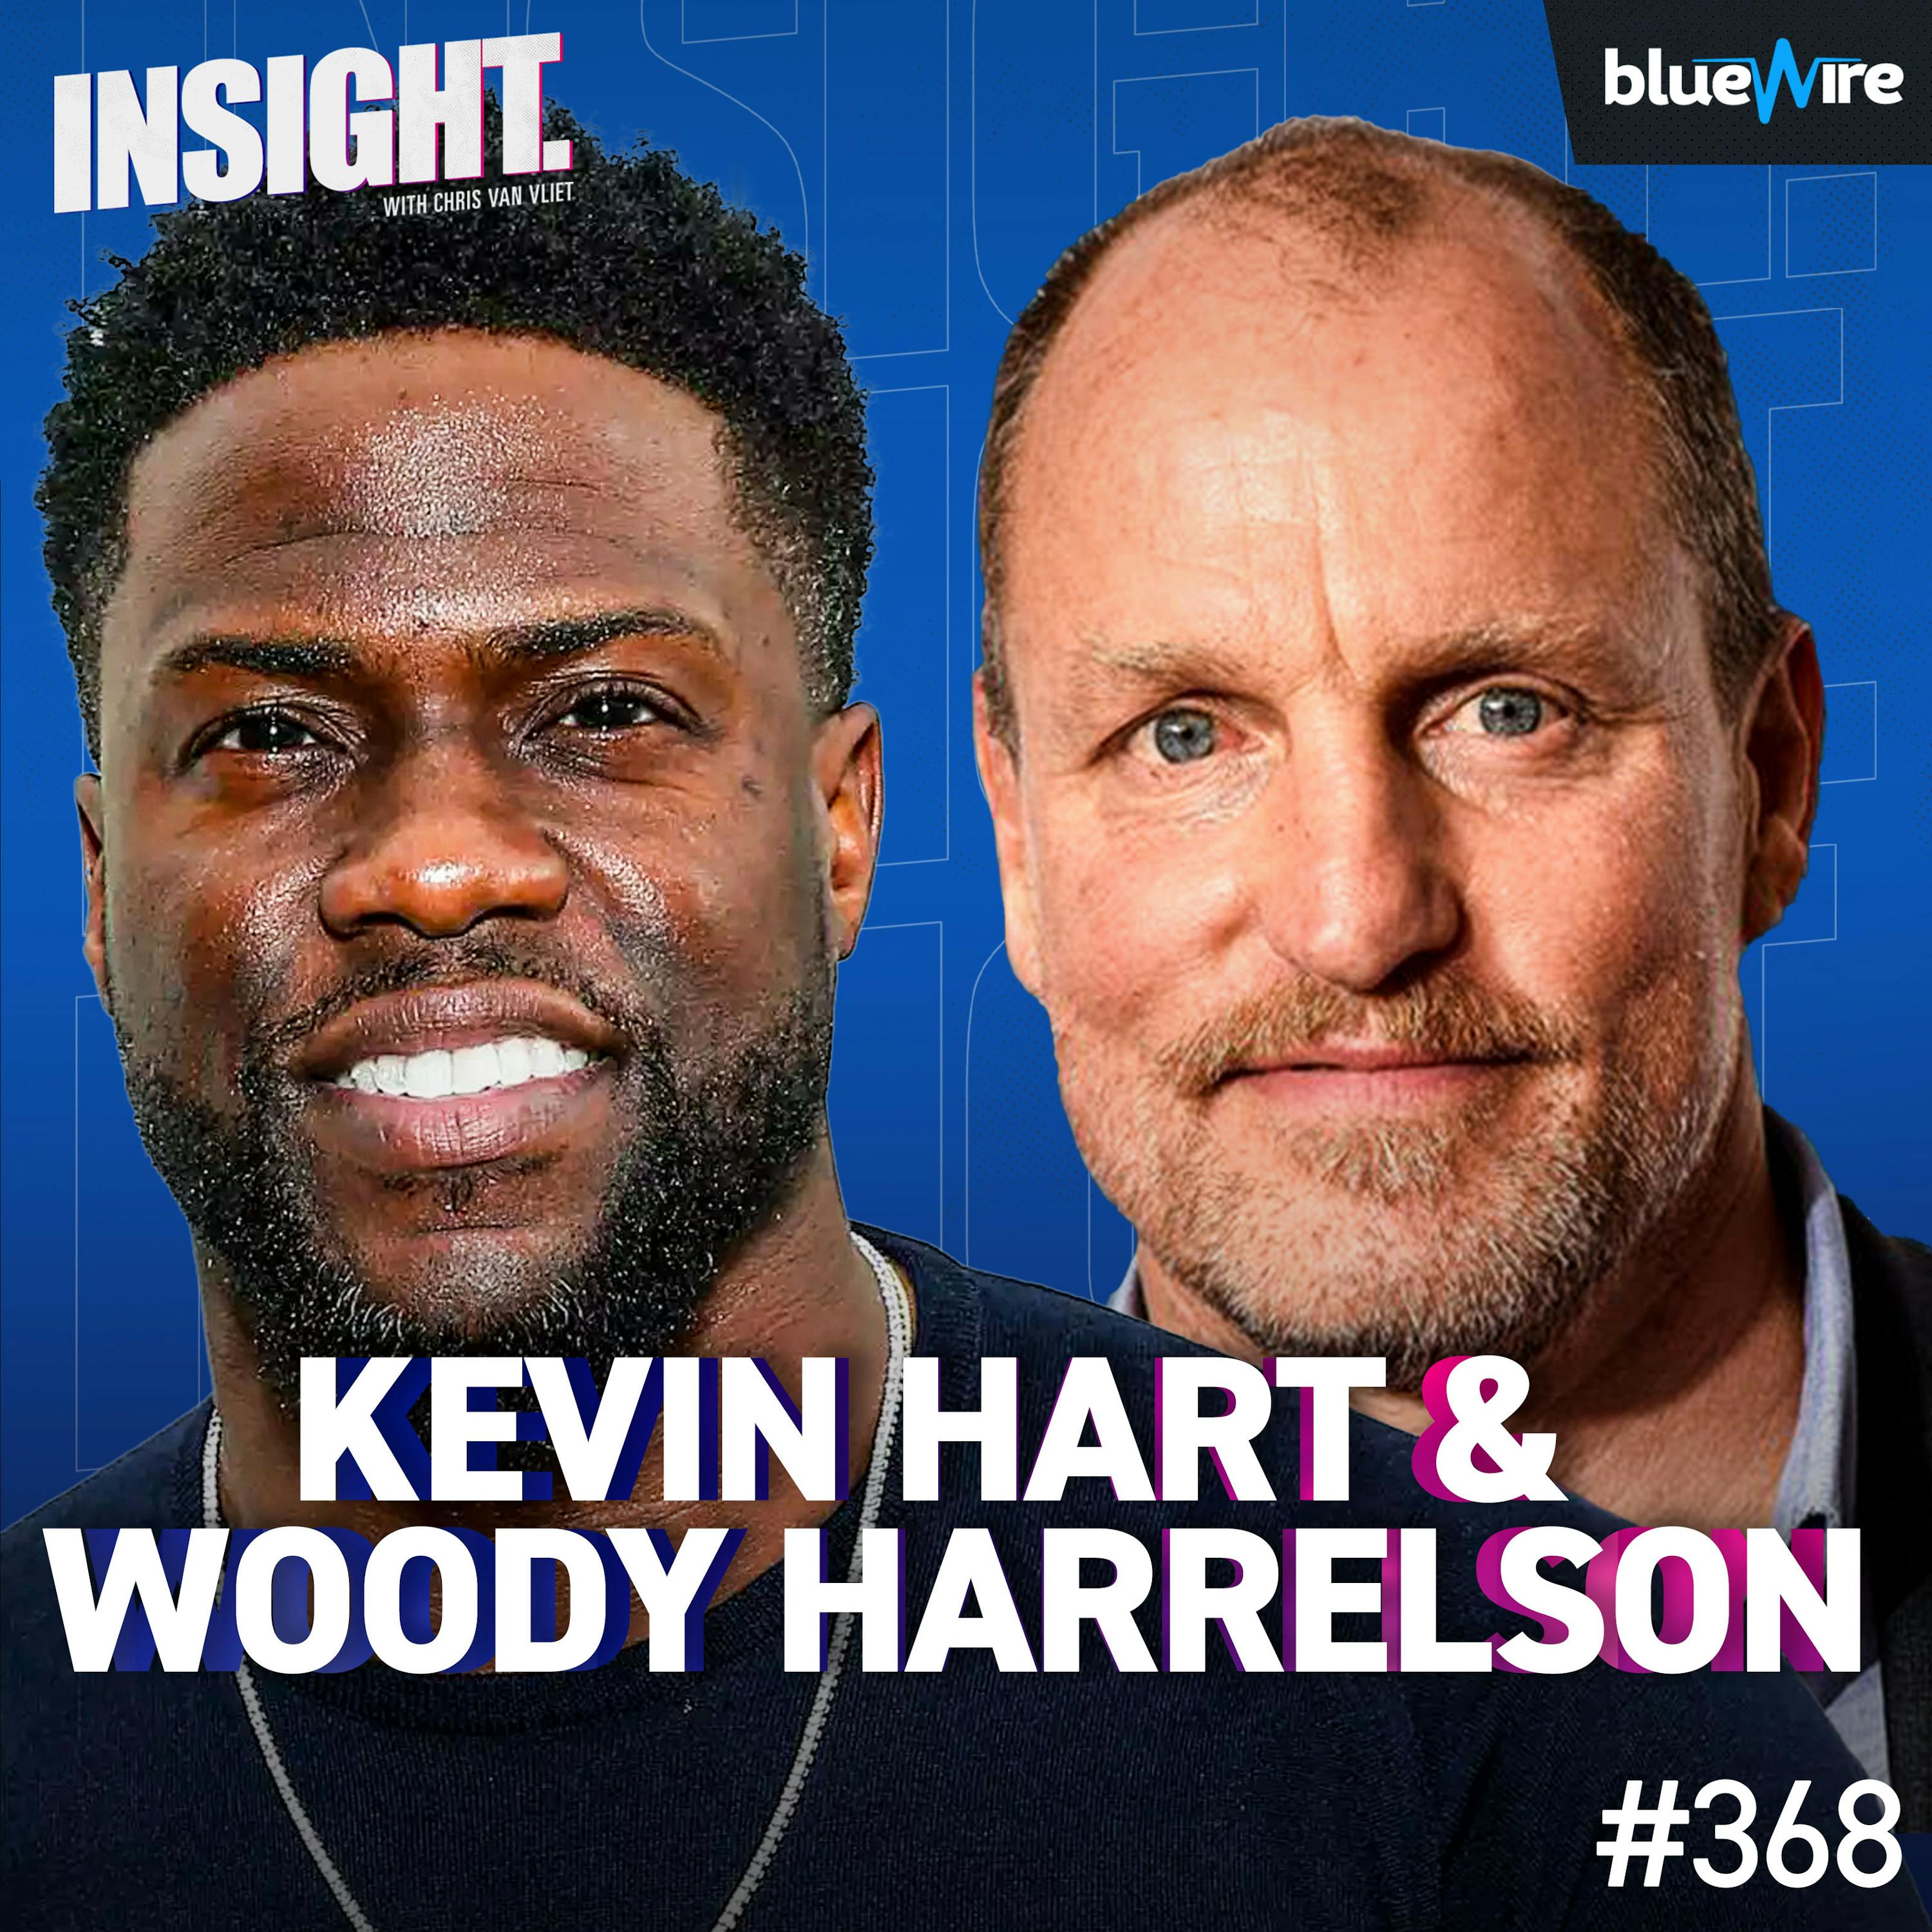 Kevin Hart & Woody Harrelson Are Absolute Legends!